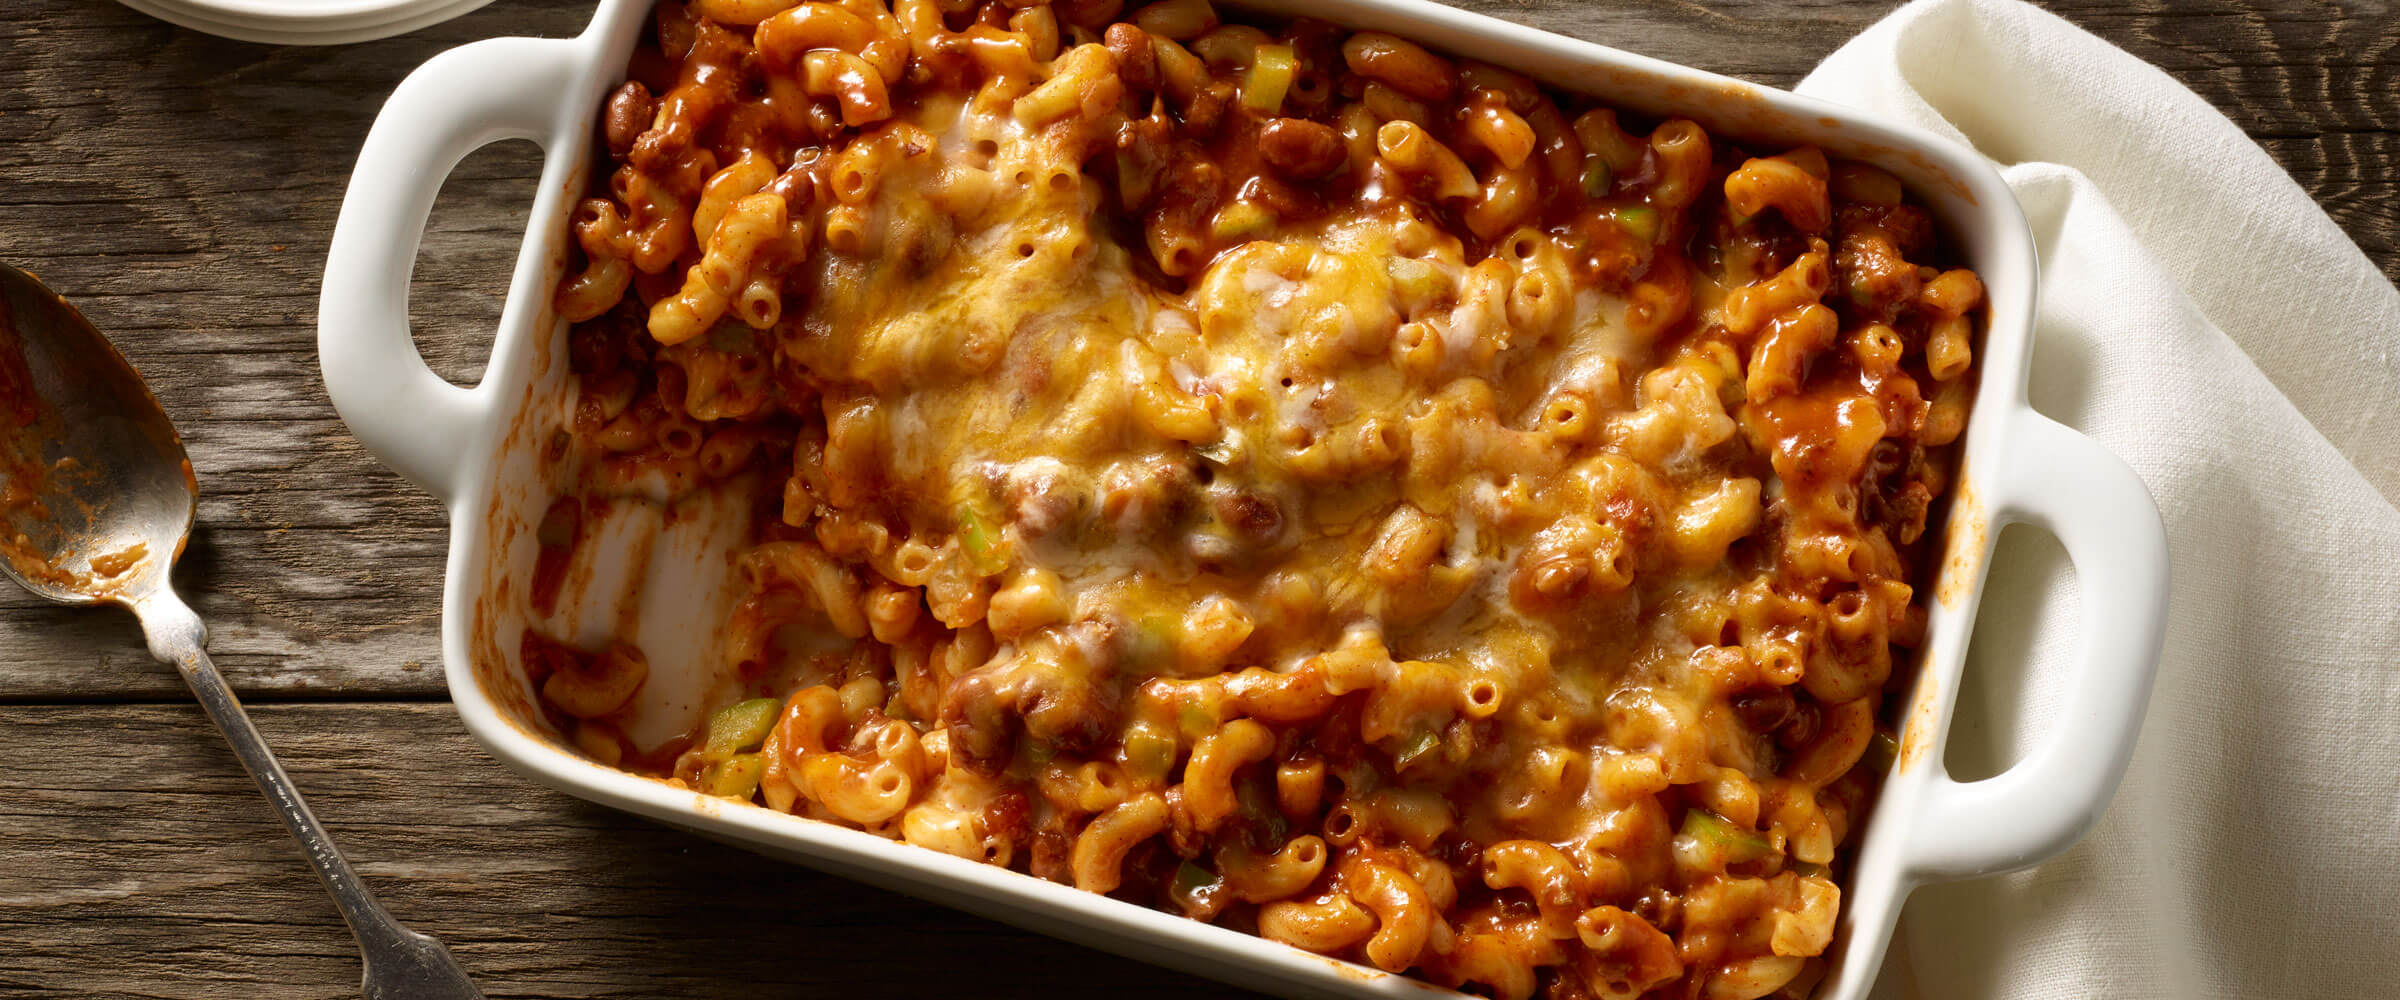 Chili Mac ‘n’ Cheese Bake in white dish with serving spoon and white linen